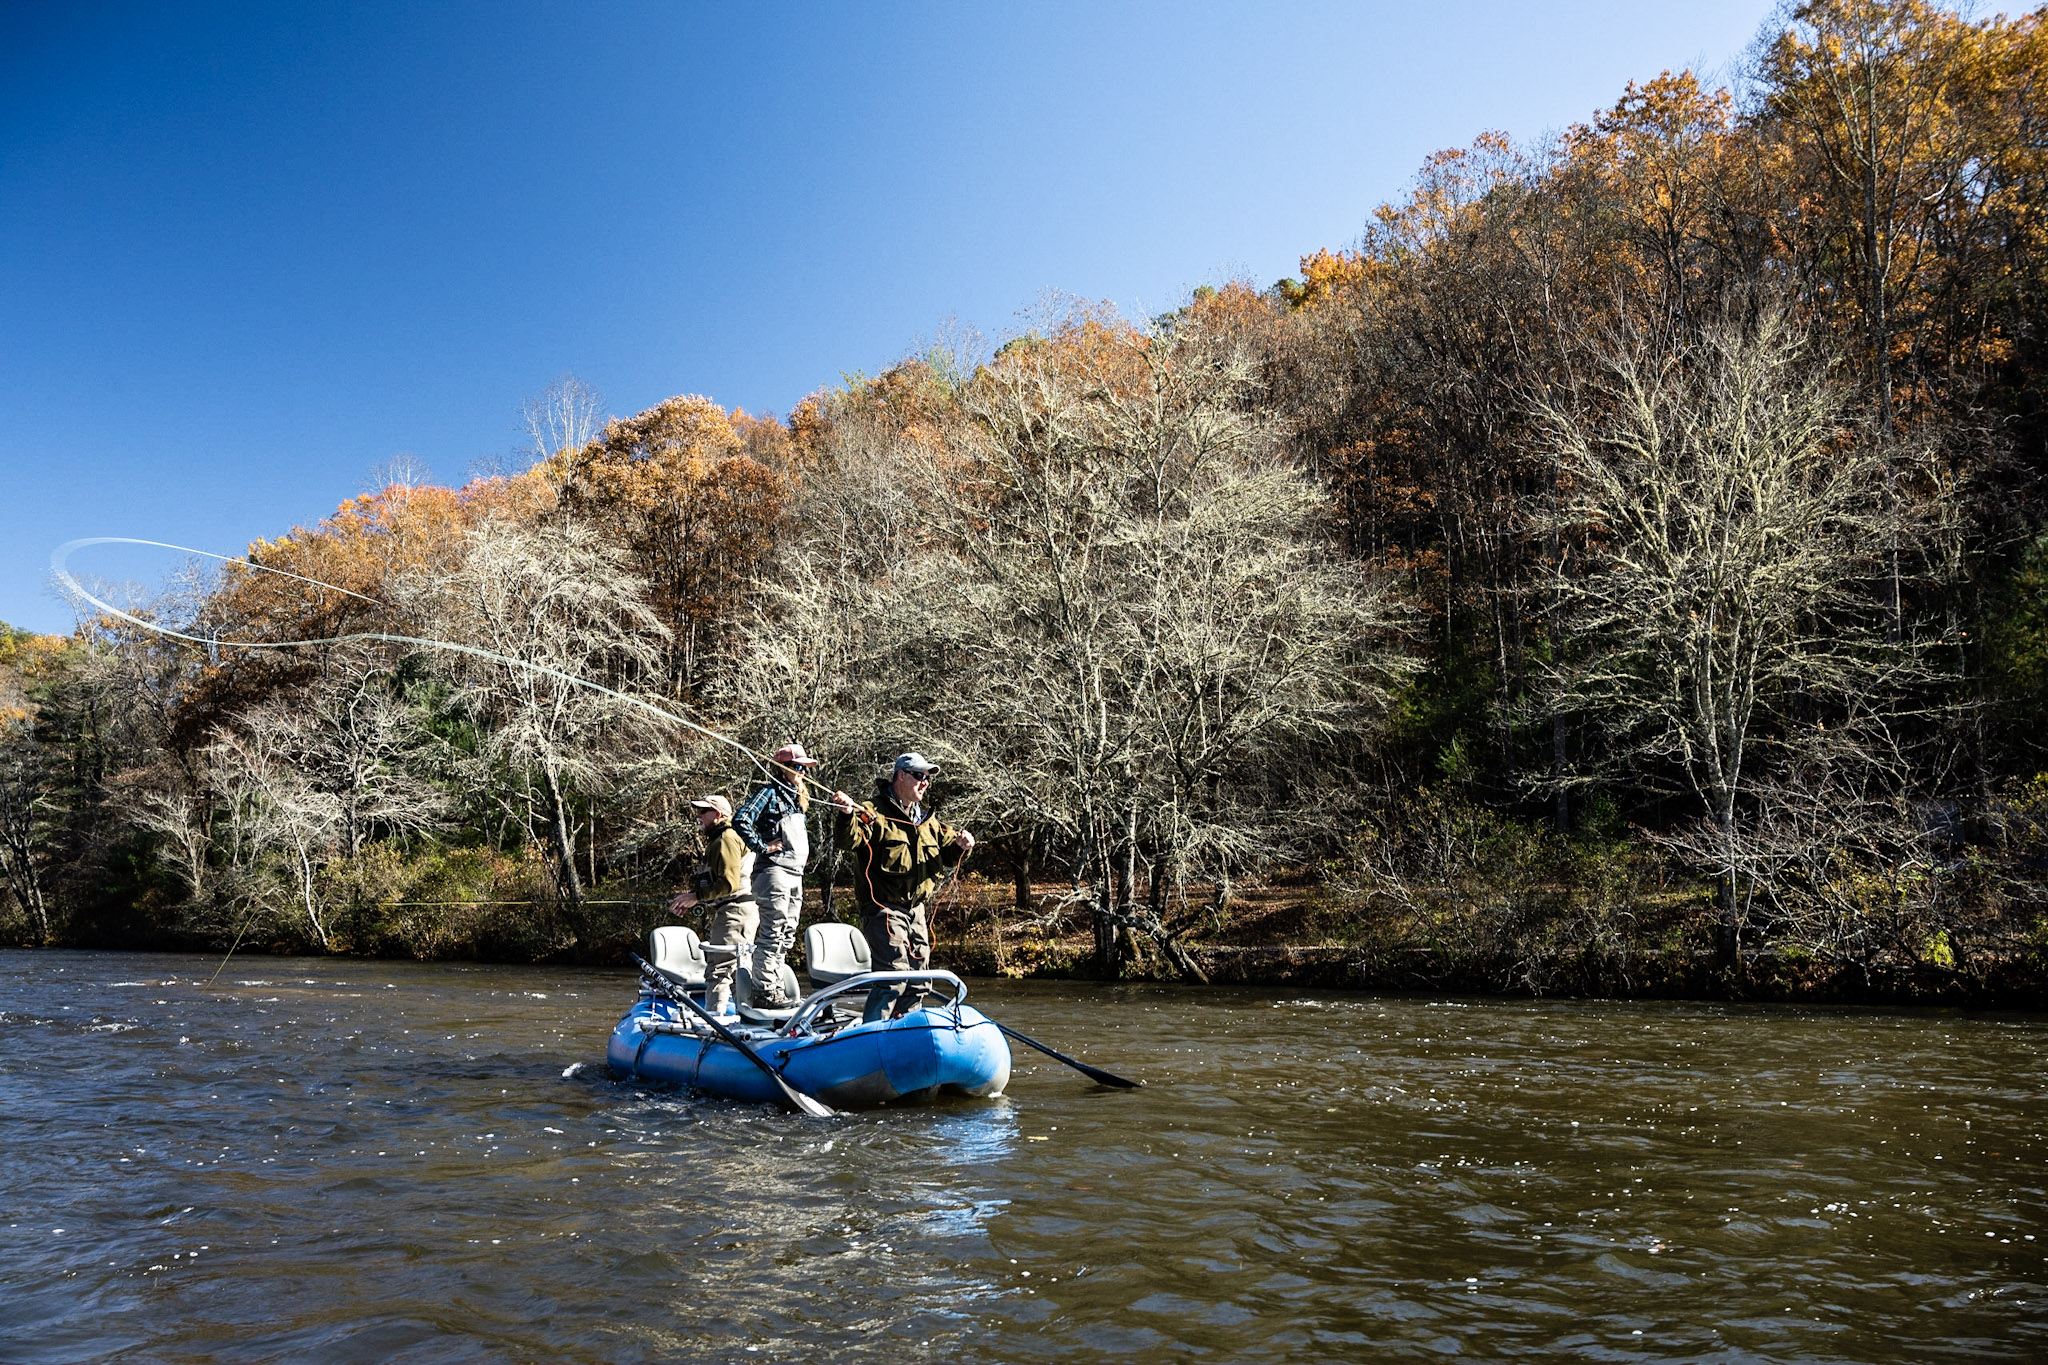 Insider's Guide to the WNC Fly Fishing Trail® - Discover Jackson NC